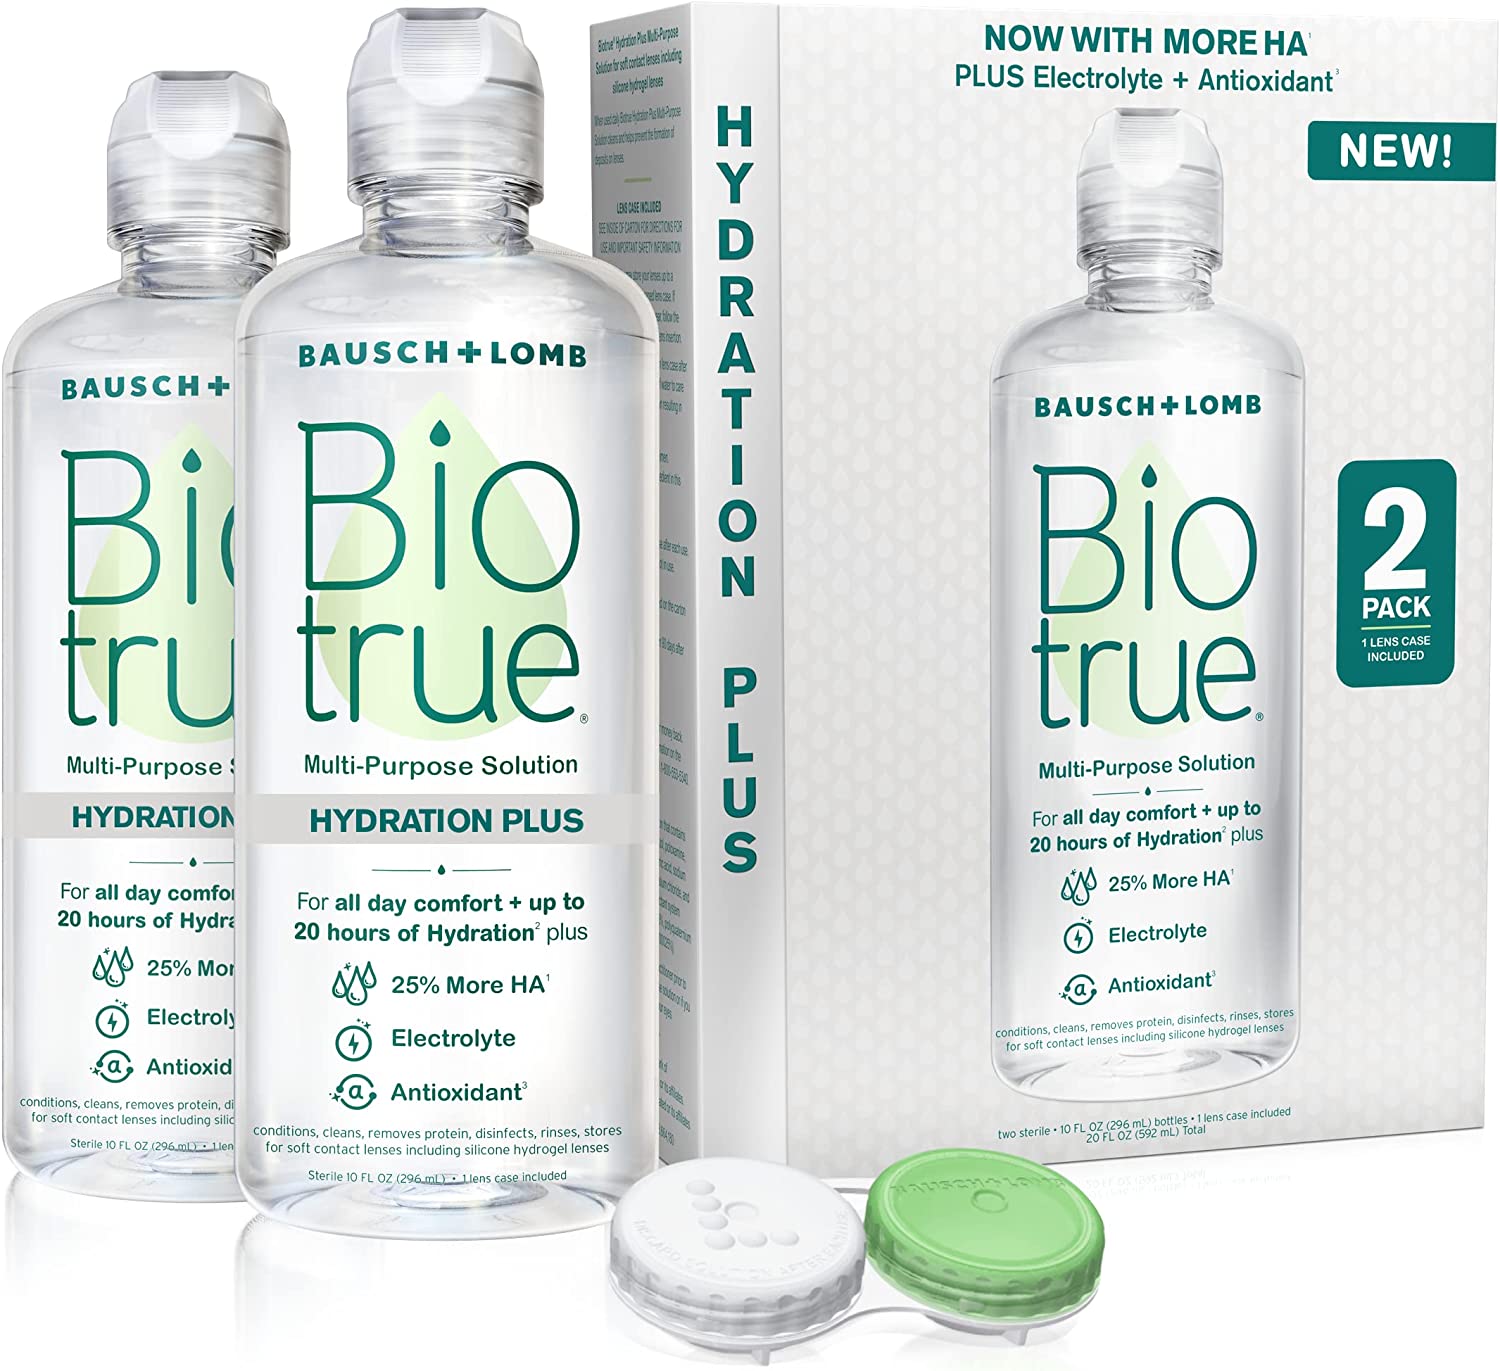 2-Pack 10-Oz Bausch + Lomb Biotrue Hydration Plus Contact Lens Solution w/ Lens Case $12.05 ($6.01 each) w/ S&S + Free Shipping w/ Prime or on $25+